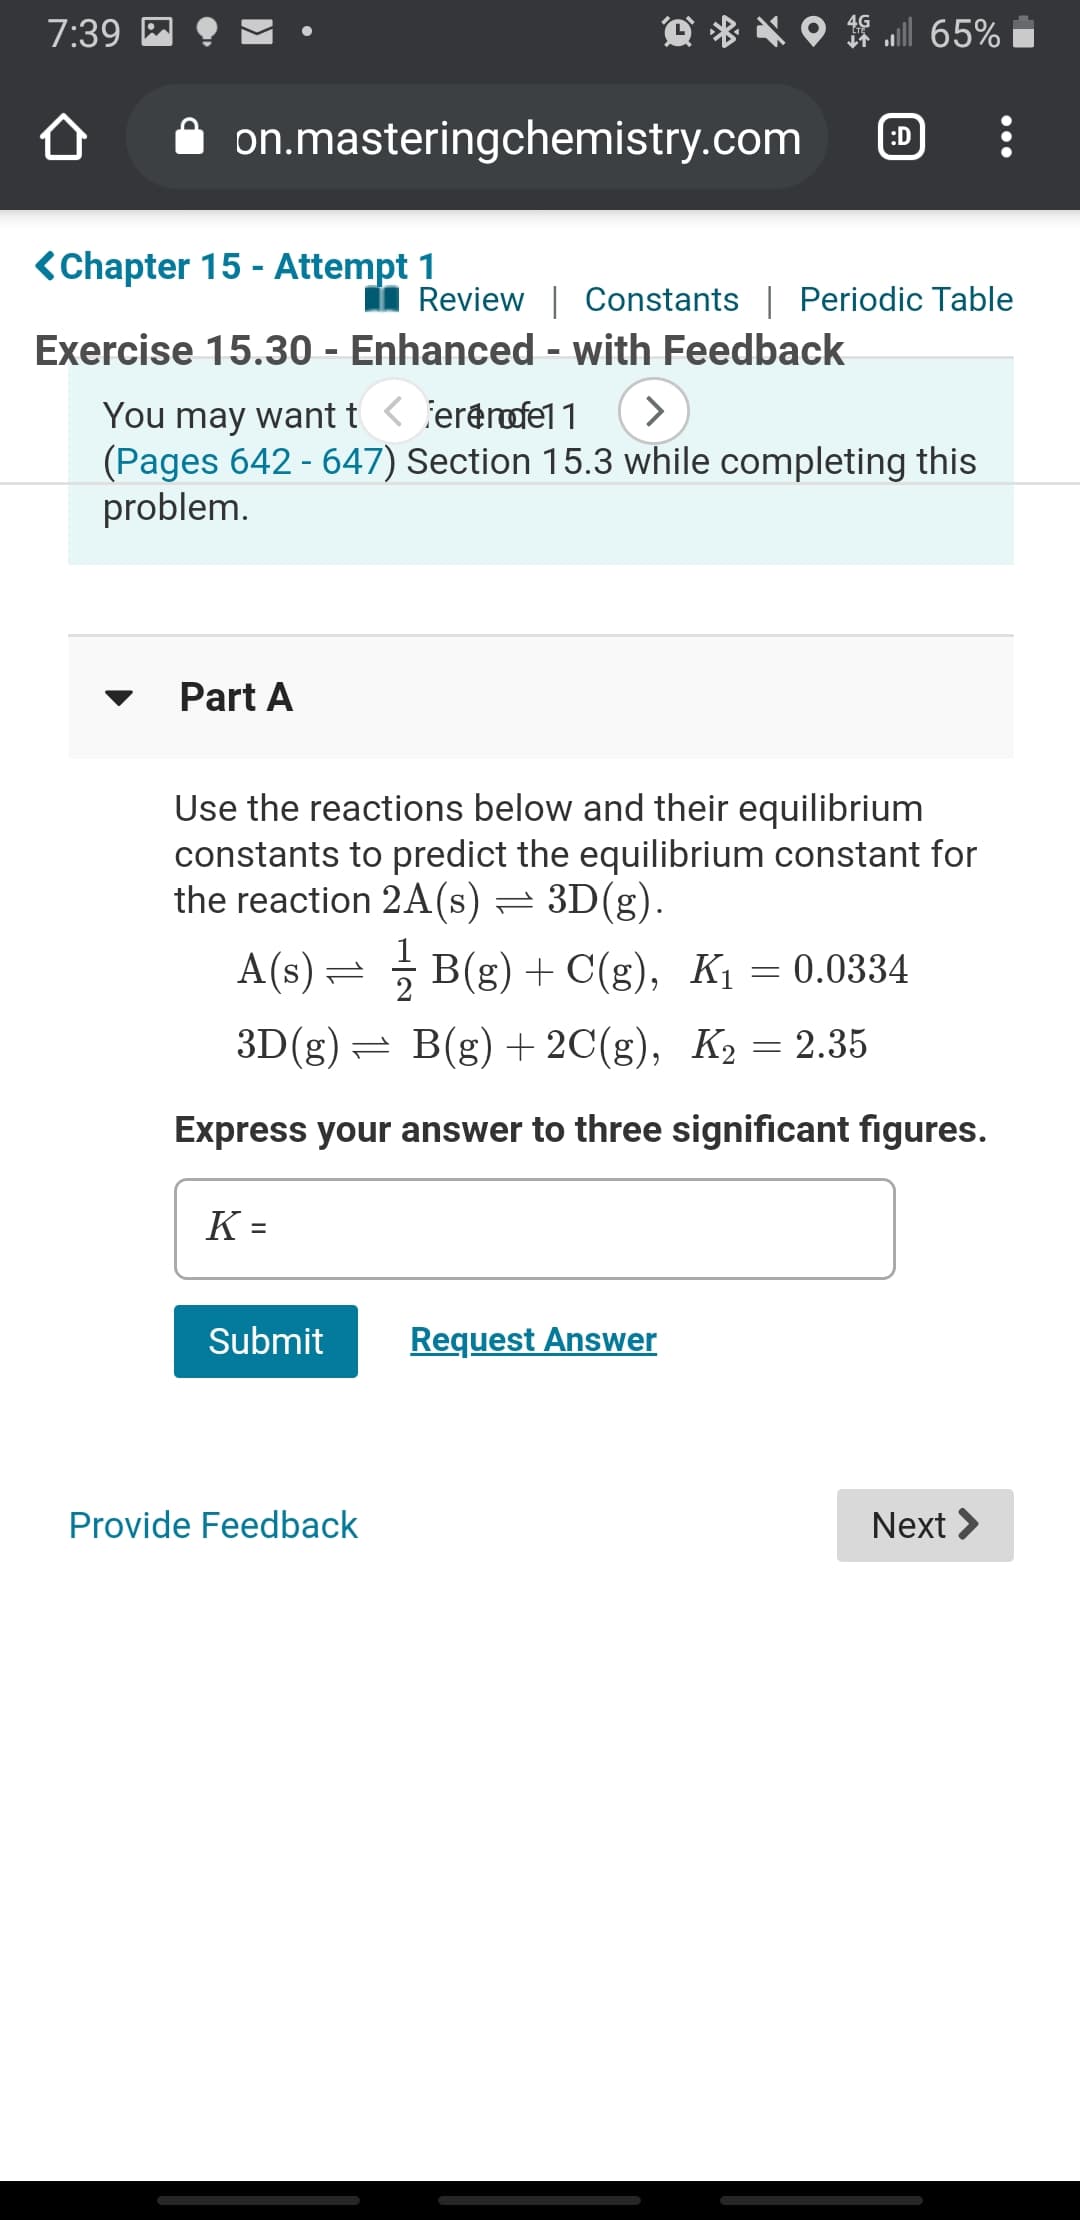 7:39 M
l 65%
on.masteringchemistry.com
:D
<Chapter 15 - Attempt 1
Review | Constants | Periodic Table
Exercise 15.30 - Enhanced - with Feedback
You may want t < fererofel 1
(Pages 642 - 647) Section 15.3 while completing this
problem.
Part A
Use the reactions below and their equilibrium
constants to predict the equilibrium constant for
the reaction 2A(s) = 3D(g).
A(s) = B(g) + C(g), K1 = 0.0334
3D(g)= B(g) + 2C(g), K2 = 2.35
Express your answer to three significant figures.
K =
Submit
Request Answer
Provide Feedback
Next >
